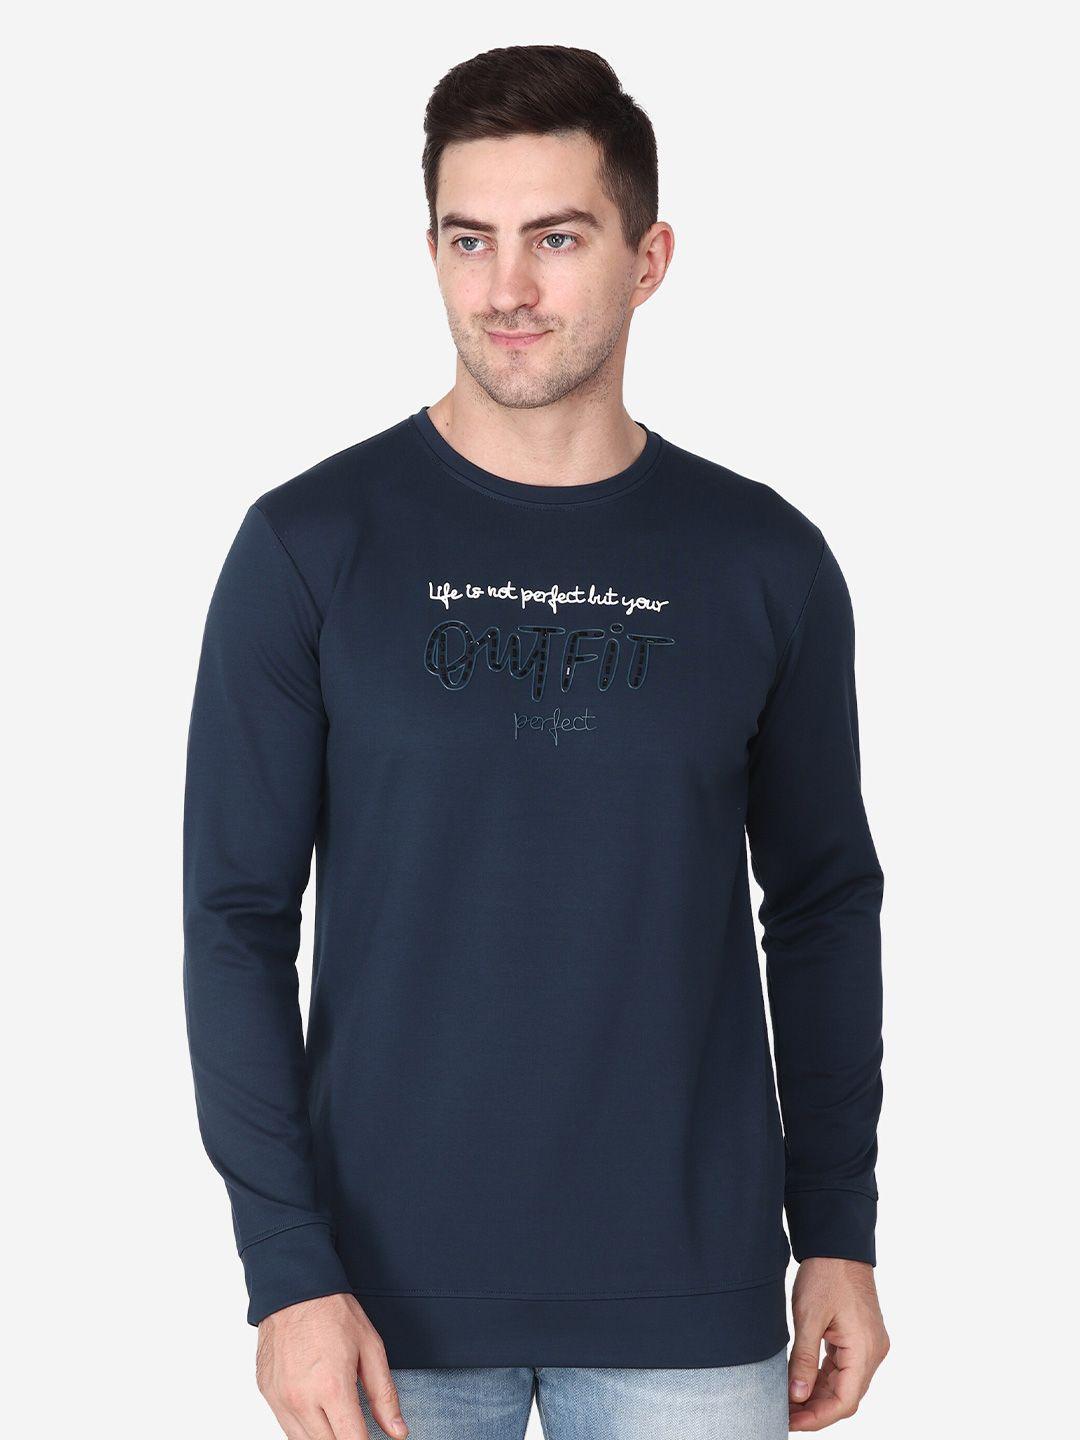 albion typography printed pure cotton pullover